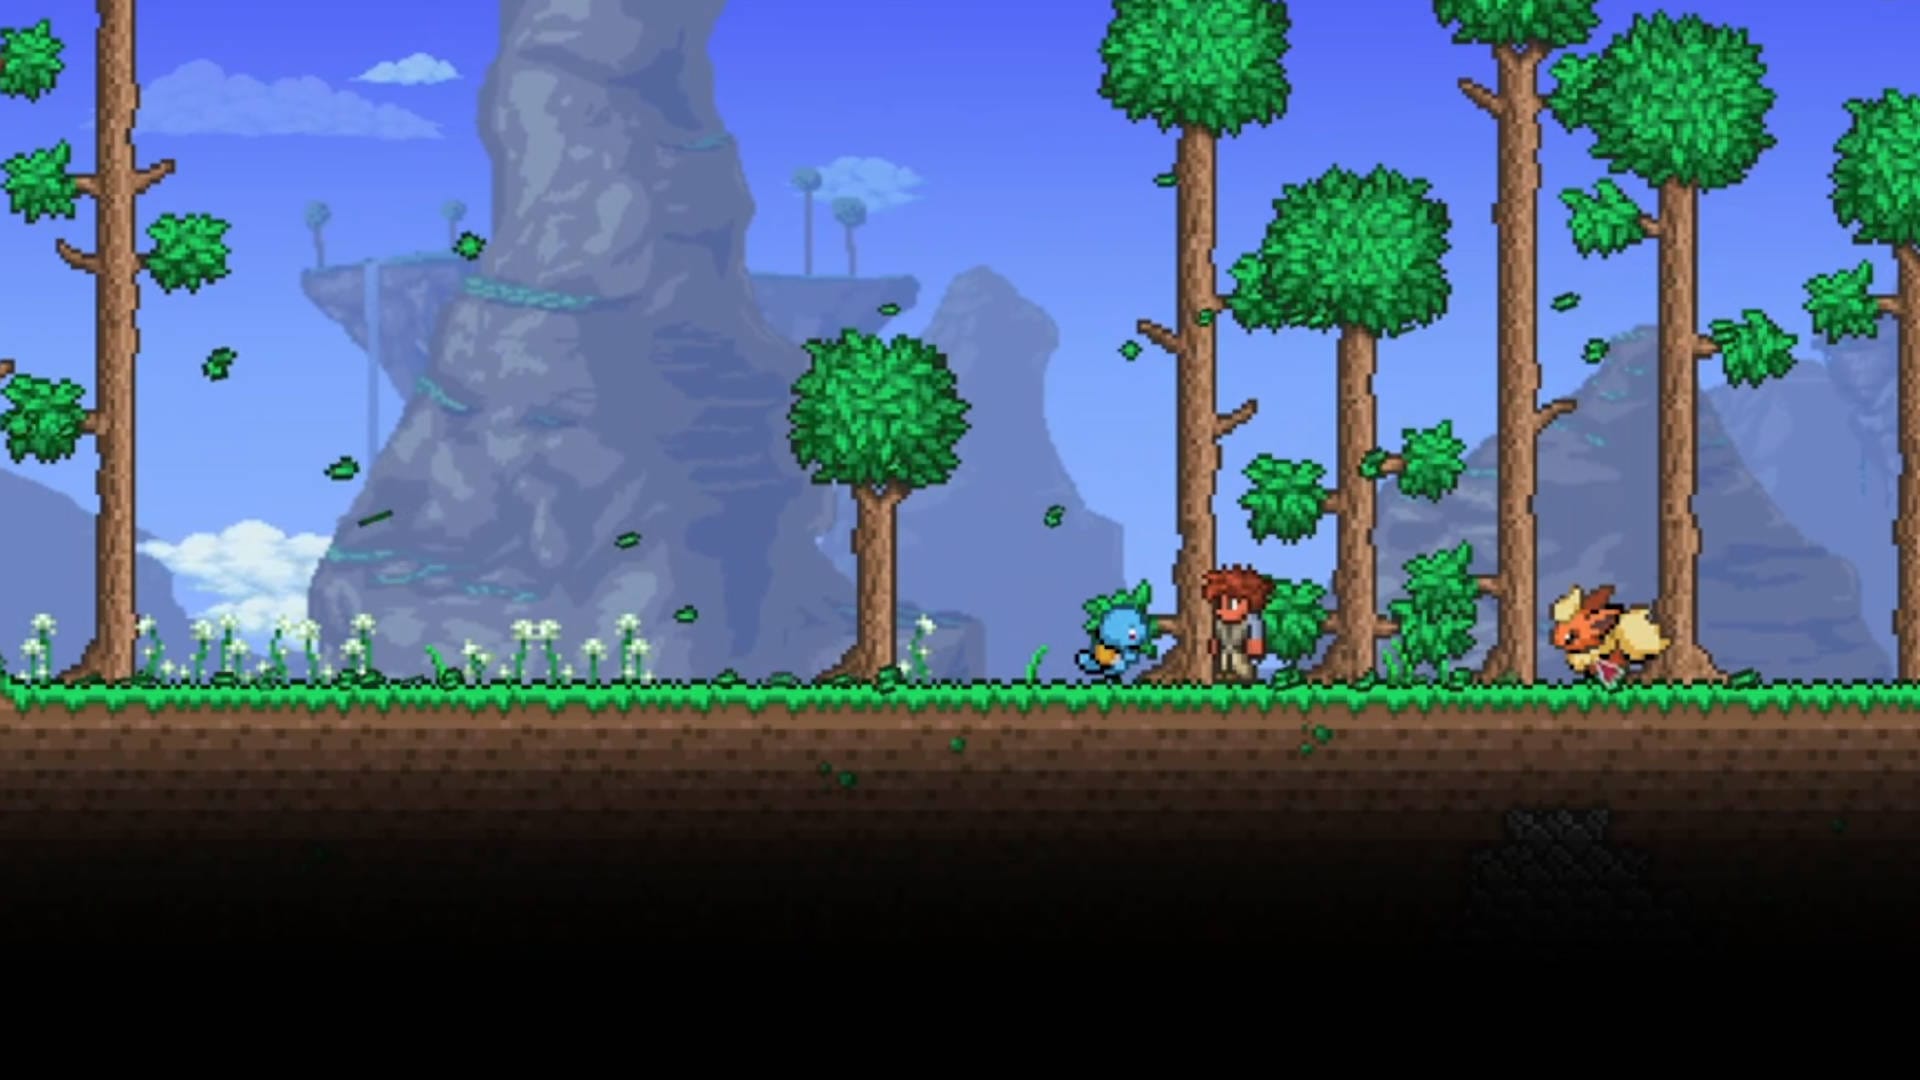 Terraria Update 1.29 Released for Labor of Love Patch 1.4.4 This